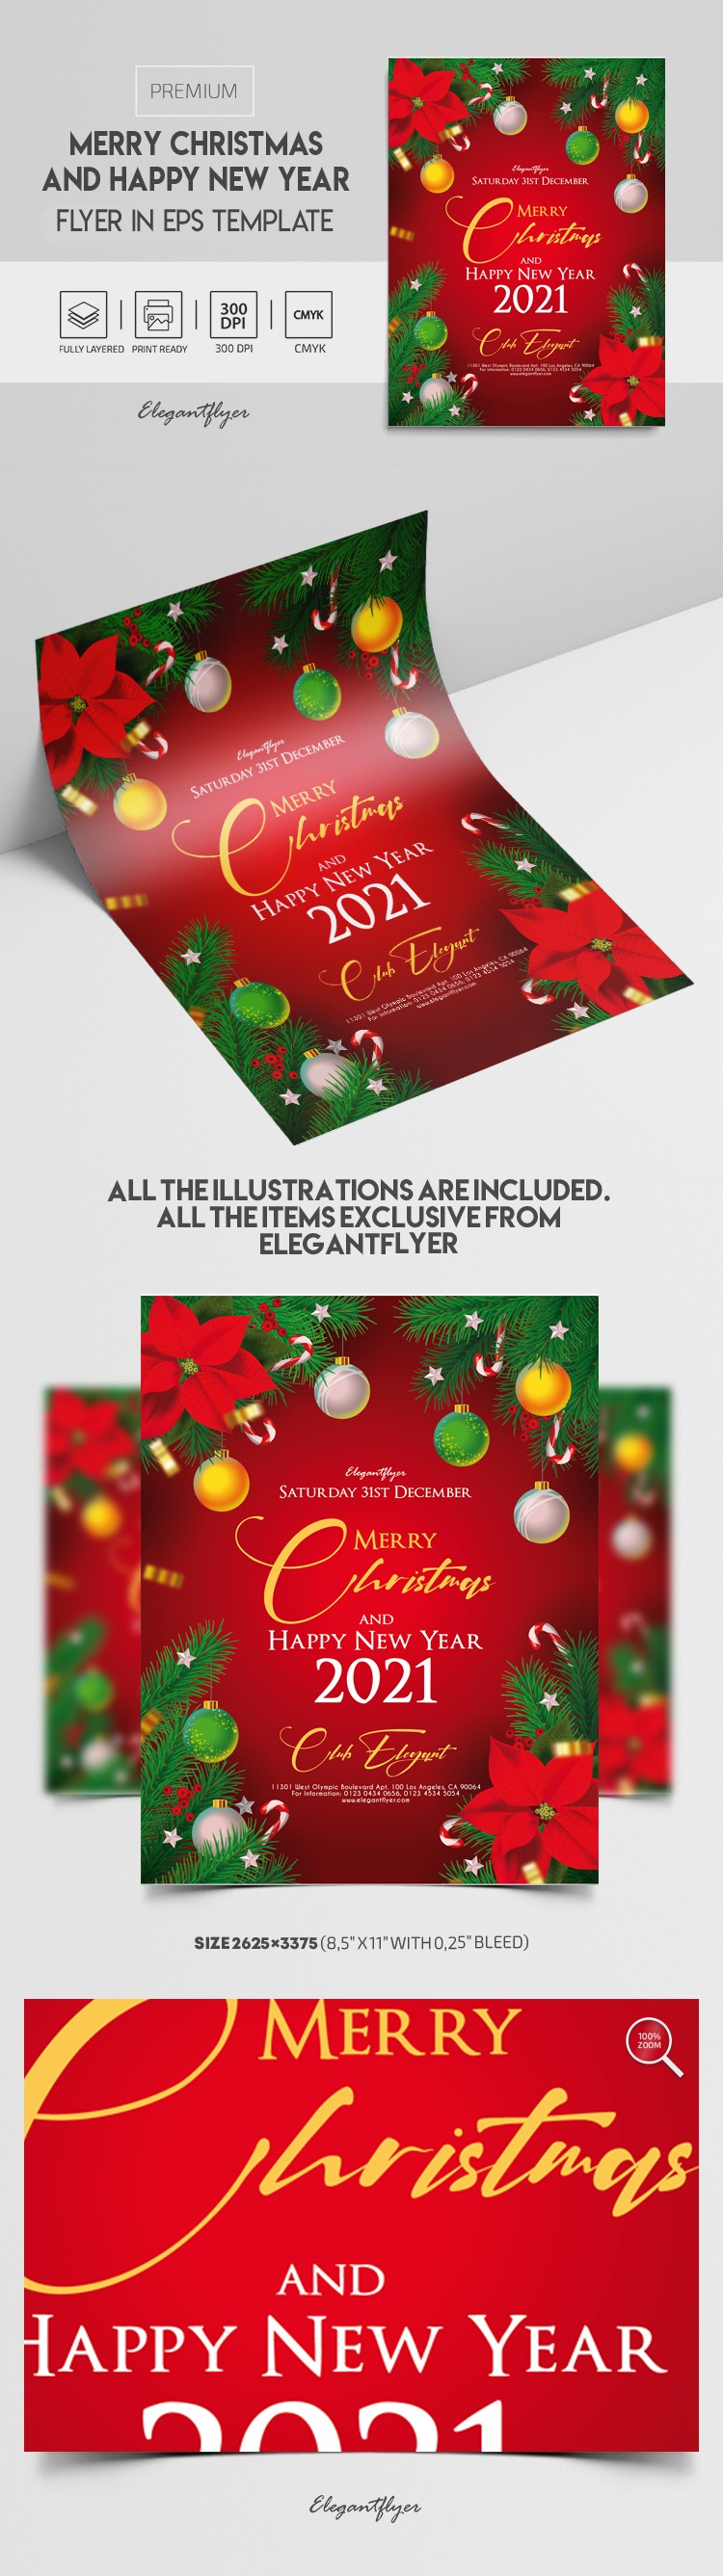 Merry Christmas and Happy New Year Flyer by ElegantFlyer